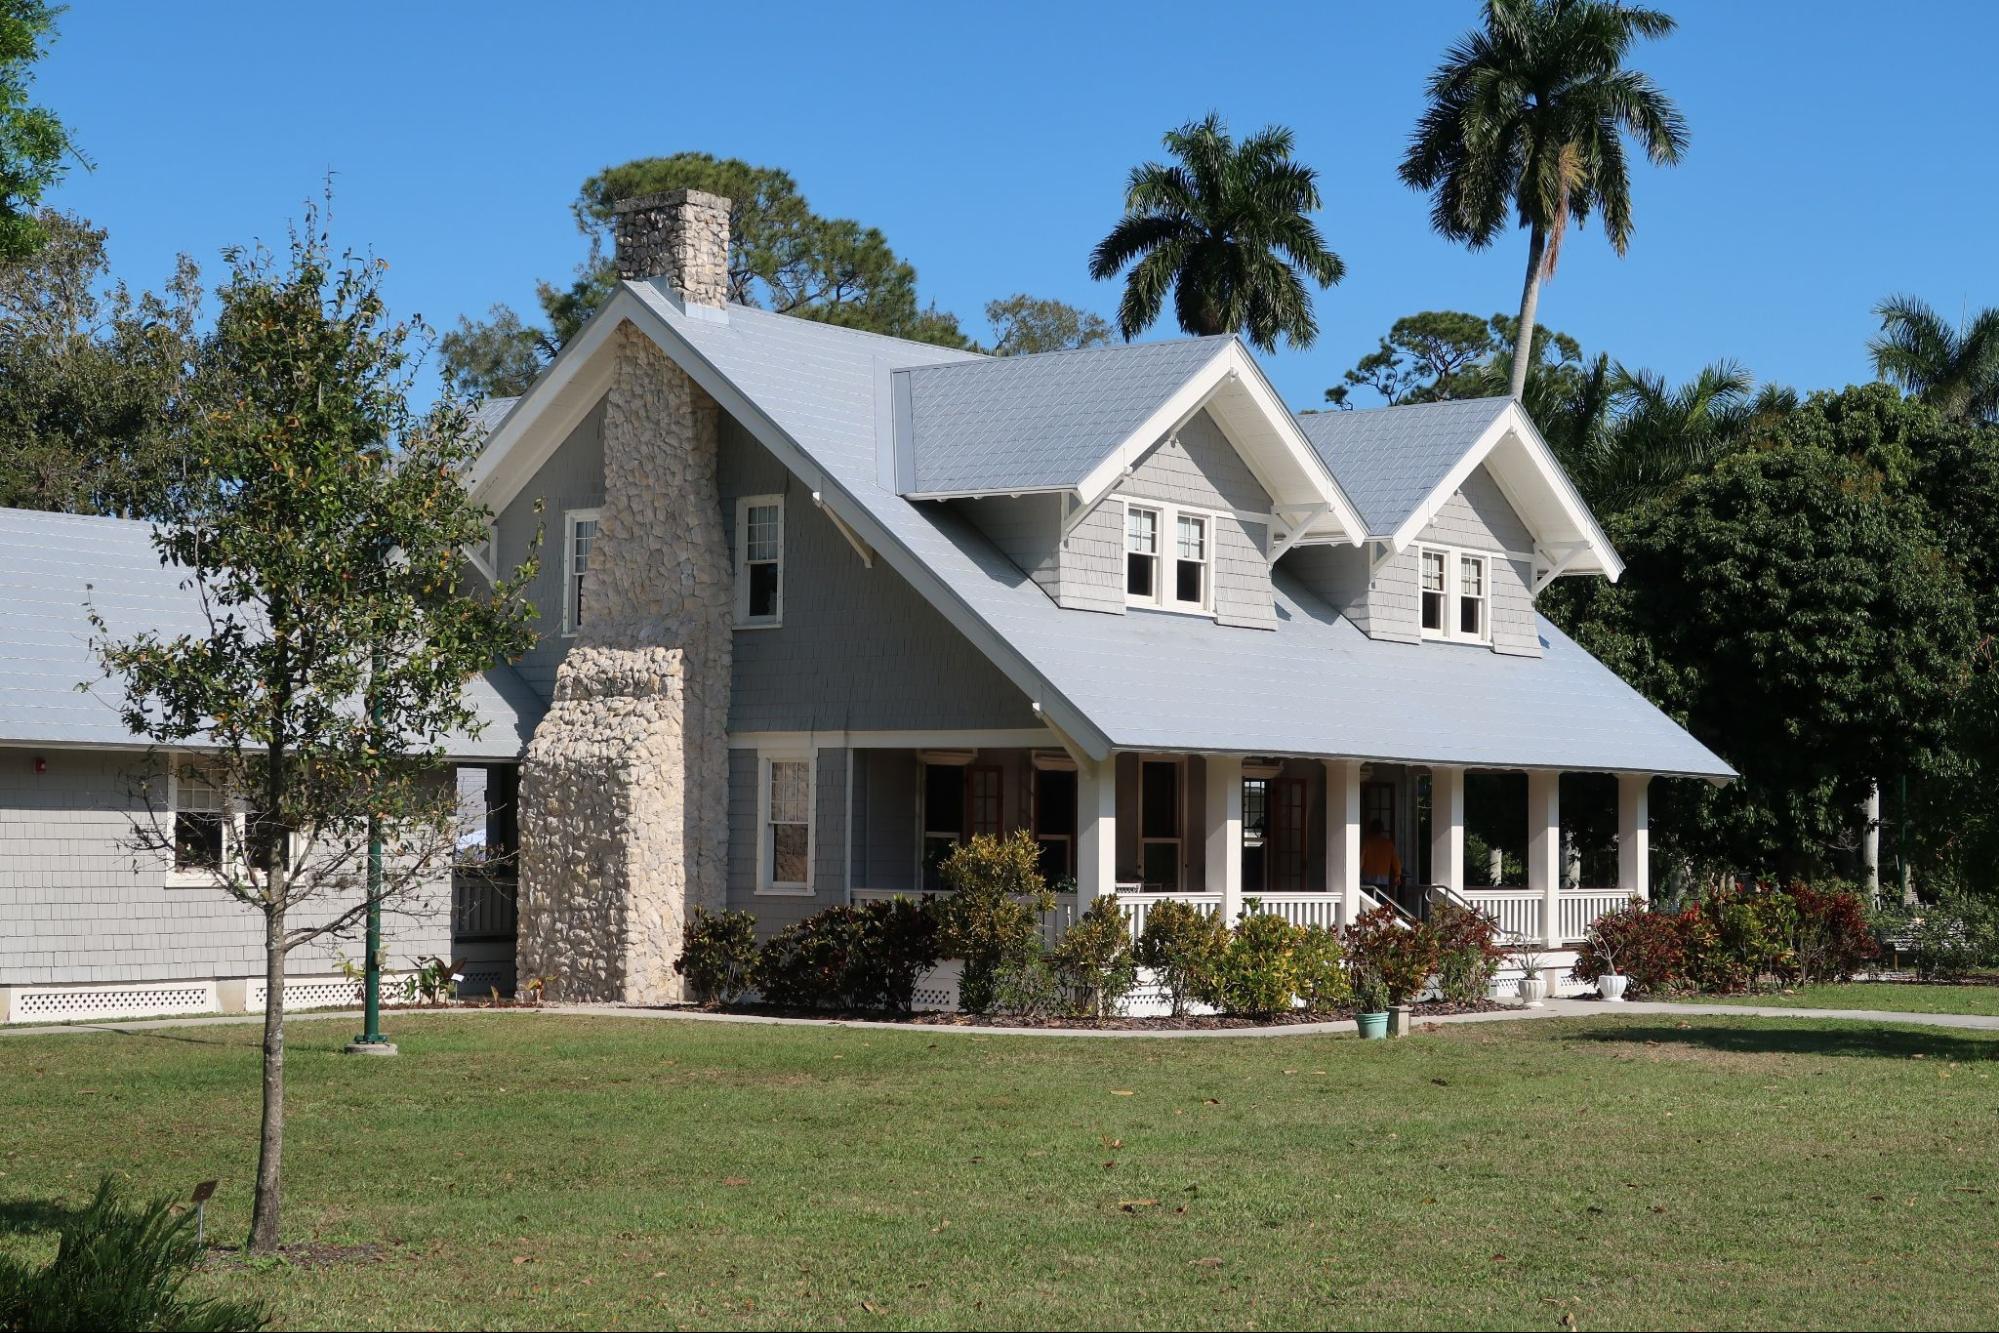 A white house with a gray roof and palm trees.